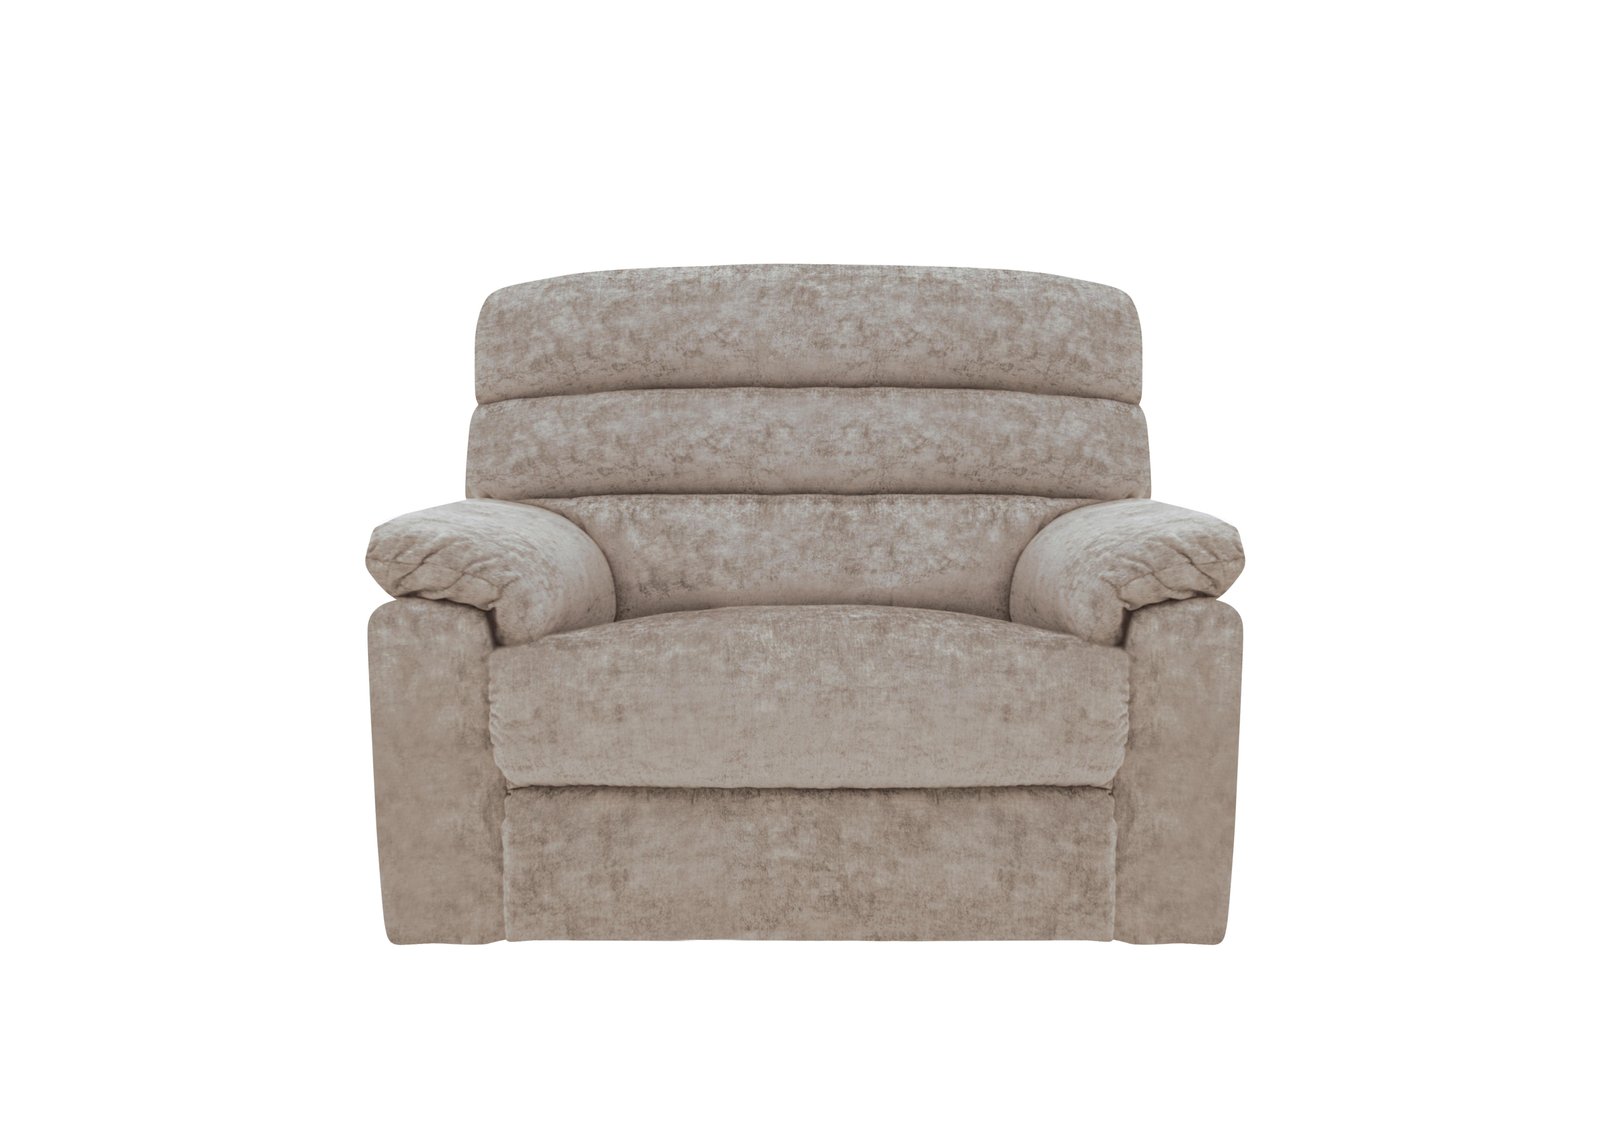 Page Fabric Love Seat with Power Recliner and Power Headrest in Hardwick Oyster on Furniture Village